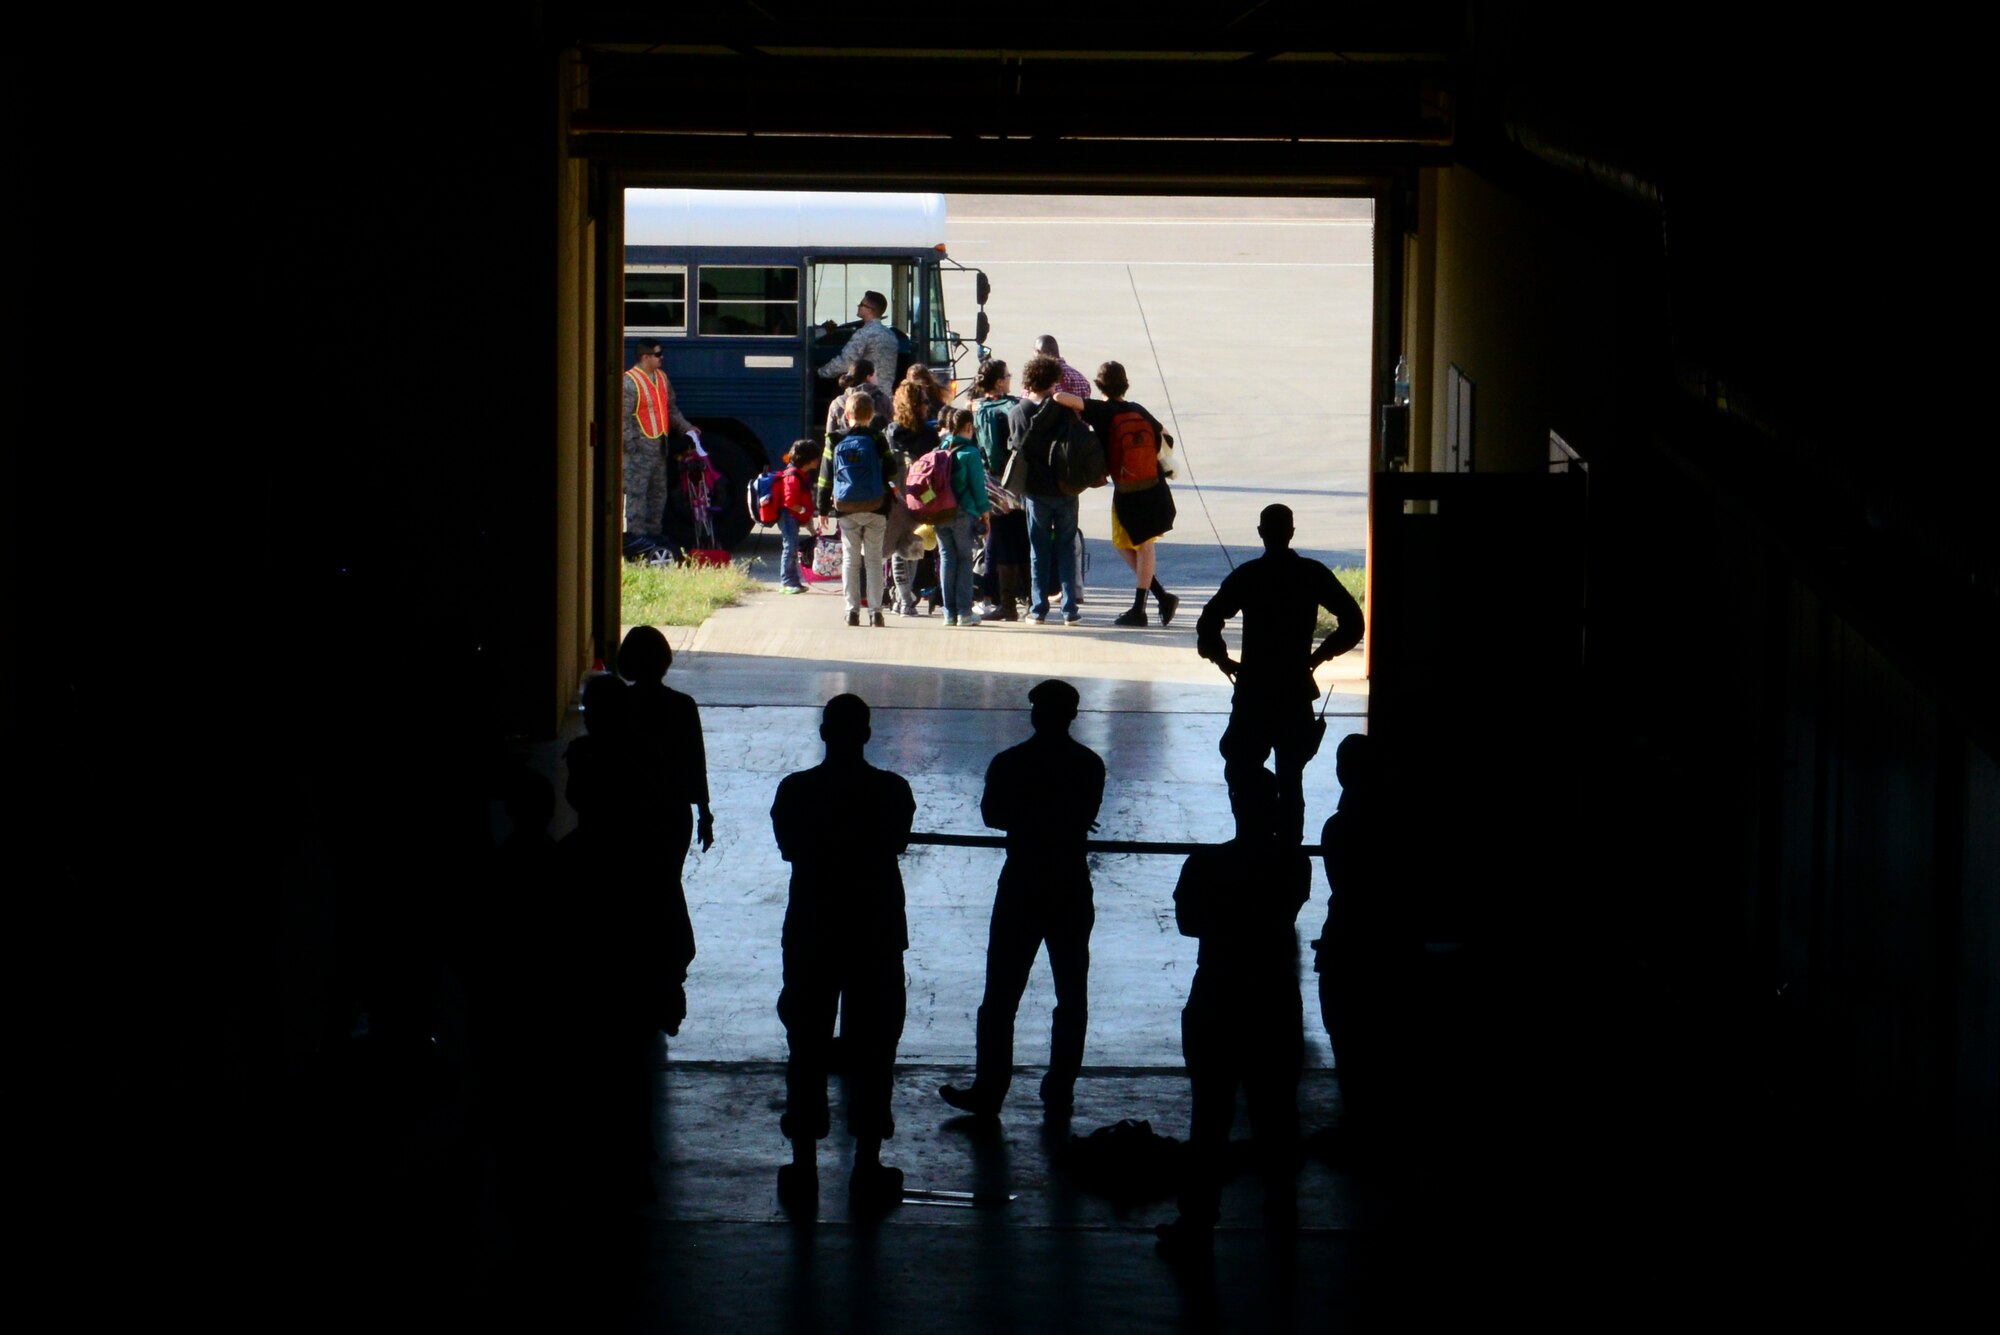 Families of U.S. Airmen and Department of Defense civilians board a bus to be shuttled to the passenger terminal, March 31, 2016, at Incirlik Air Base, Turkey. The Secretary of Defense, in coordination with the Secretary of State, ordered the departure of all Department of Defense dependents assigned to Incirlik Air Base. (U.S. Air Force photo by Staff Sgt. Caleb Pierce/Released)